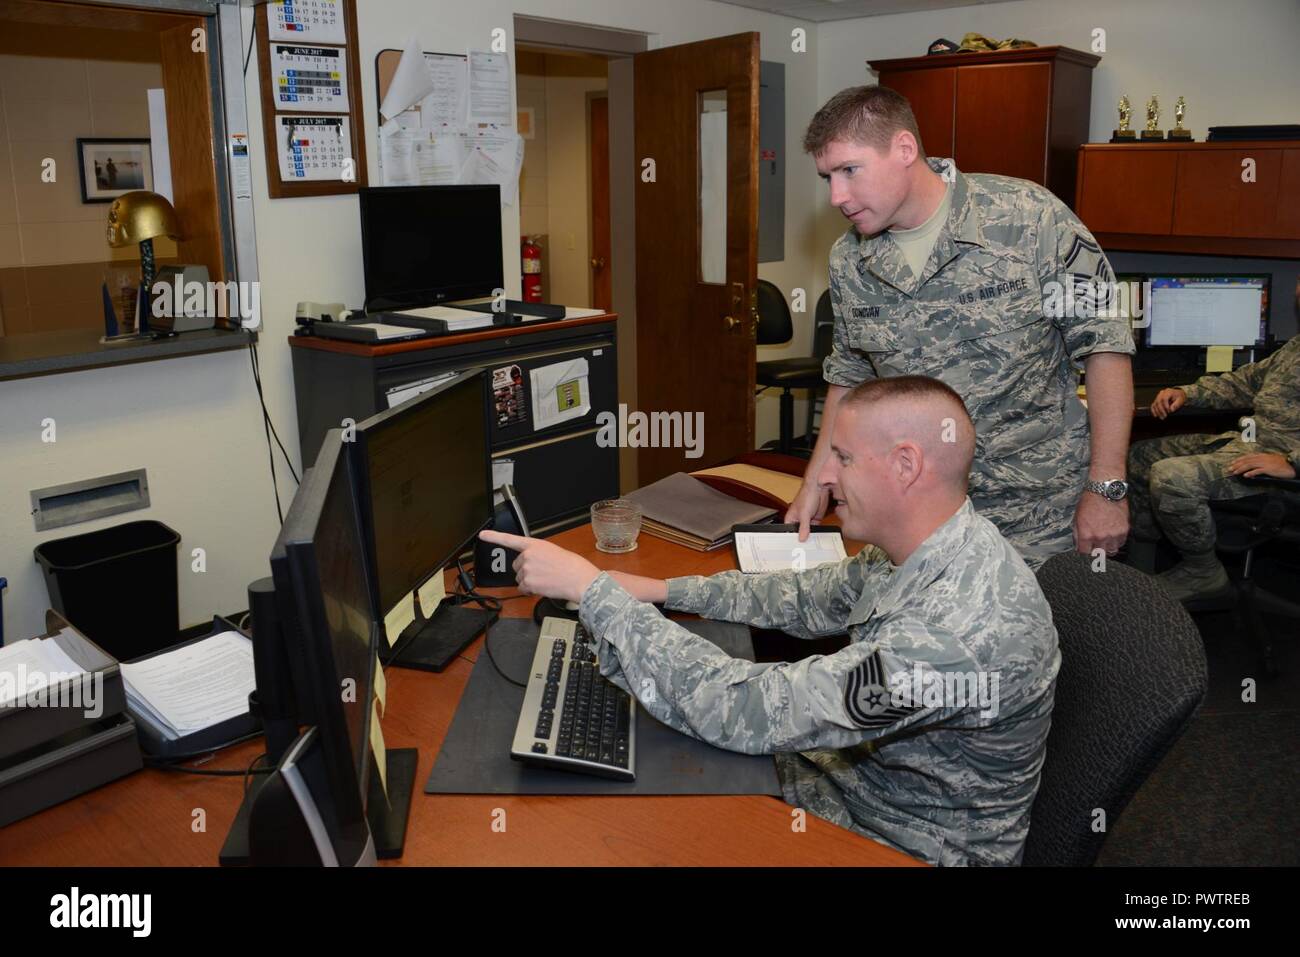 Senior Master Sgt. Joe Donovan 185th Air Refueling Wing Financial Management Superintendent, talks with Technical Sgt. Mike Winter 185th ARW Travel Pay Technician while at the Iowa Air National Guard’s 185th ARW Financial Management office in Sioux City, Iowa on June 21, 2017.  U.S. Air National Guard Stock Photo